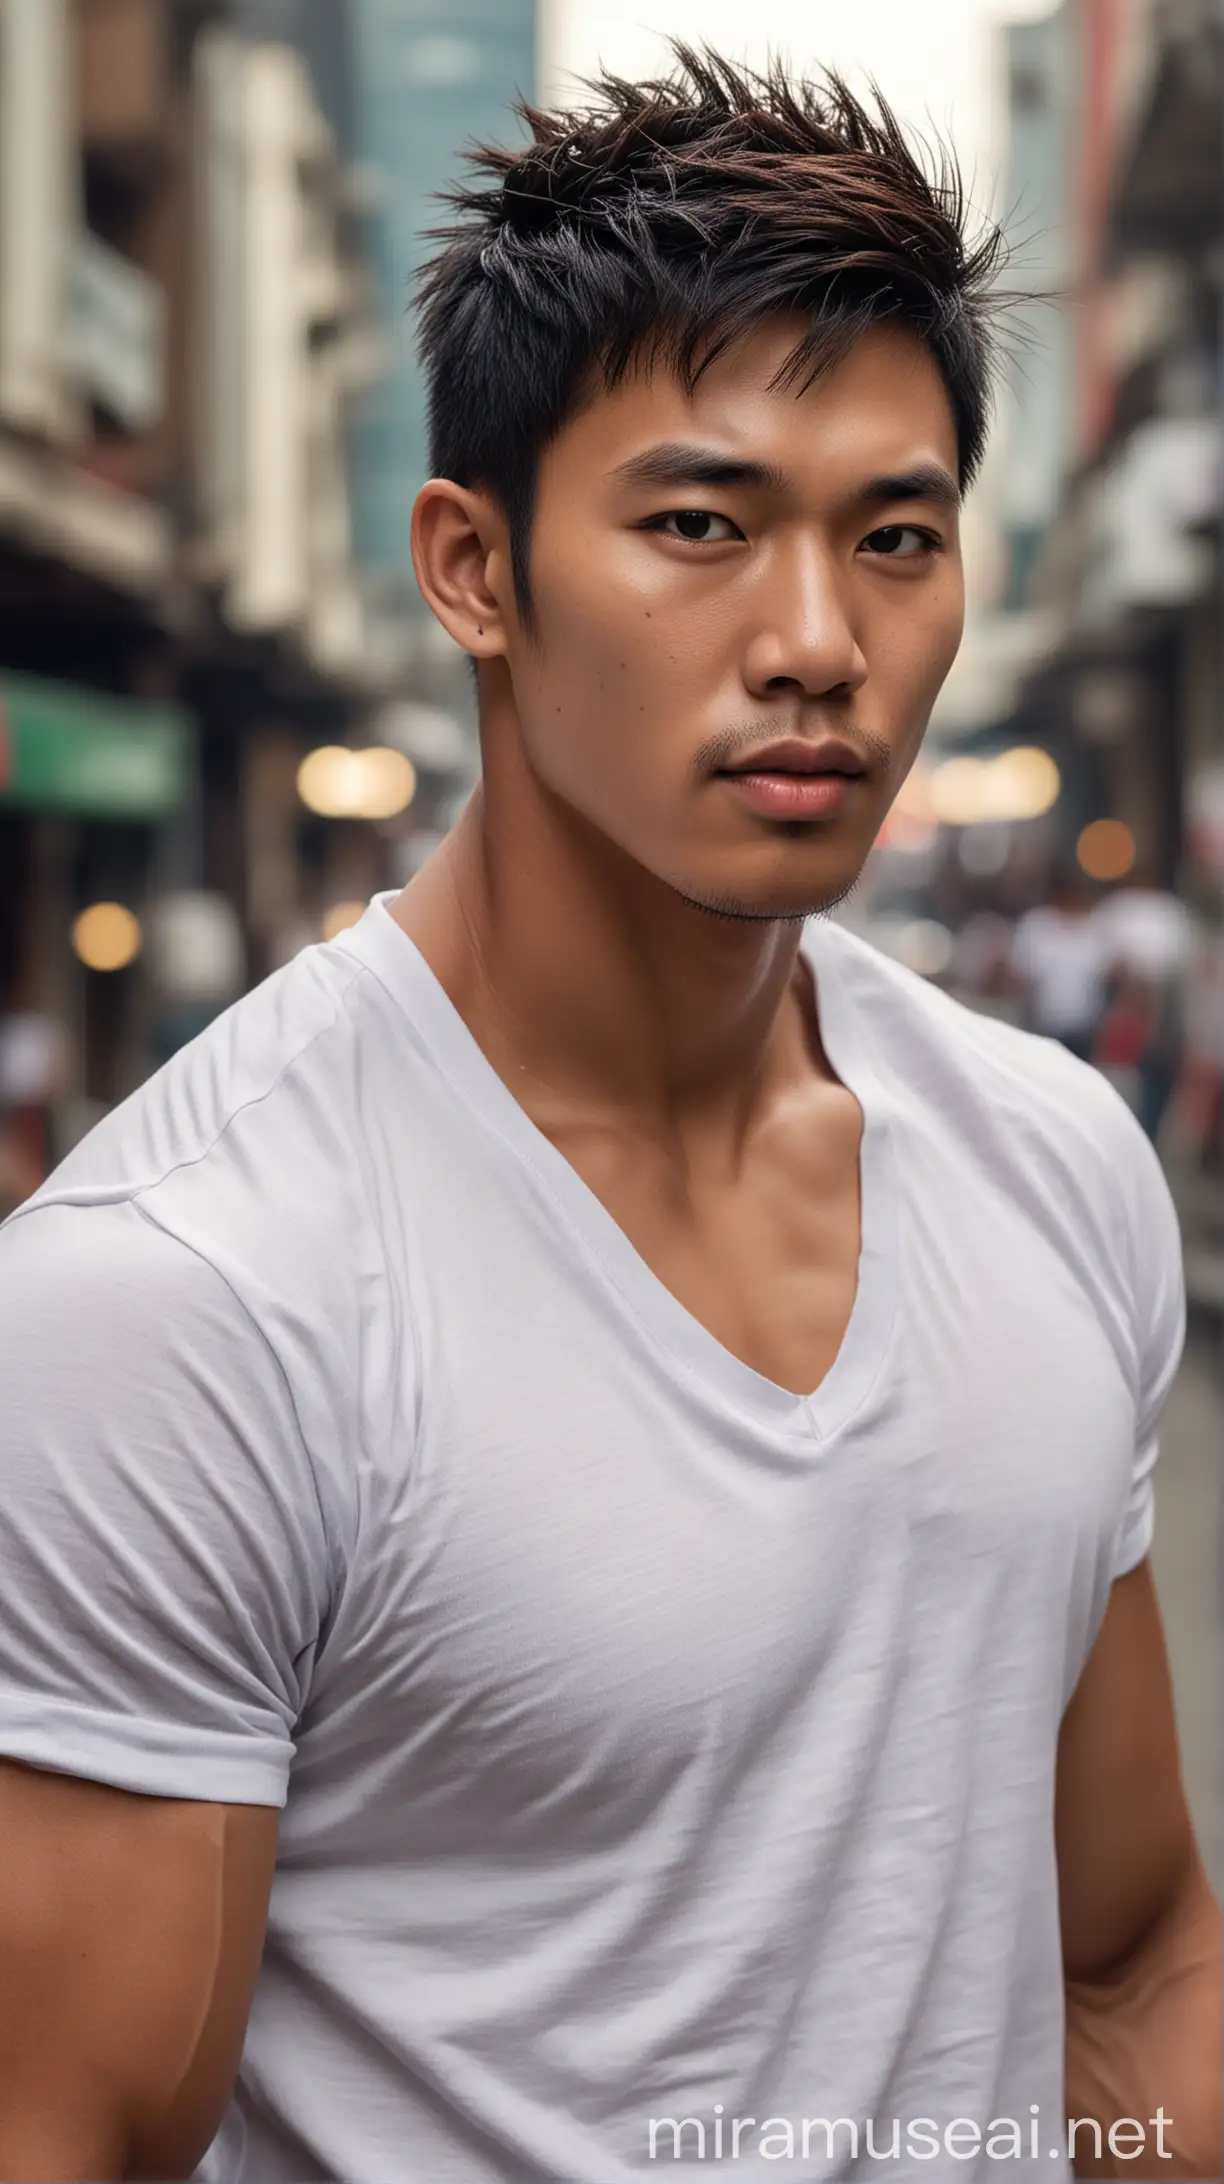 realistic photo extrem close up of an asian young handsome muscular man, fringe up stylish hair. with a typikal
Indonesian fave wearing (wearing white lithe a V-neck t-shirt which has dark color also on t-shirt. t-shirt have reverse color differences, Facebook facing side cool posing at the camera. Jakarta city street background